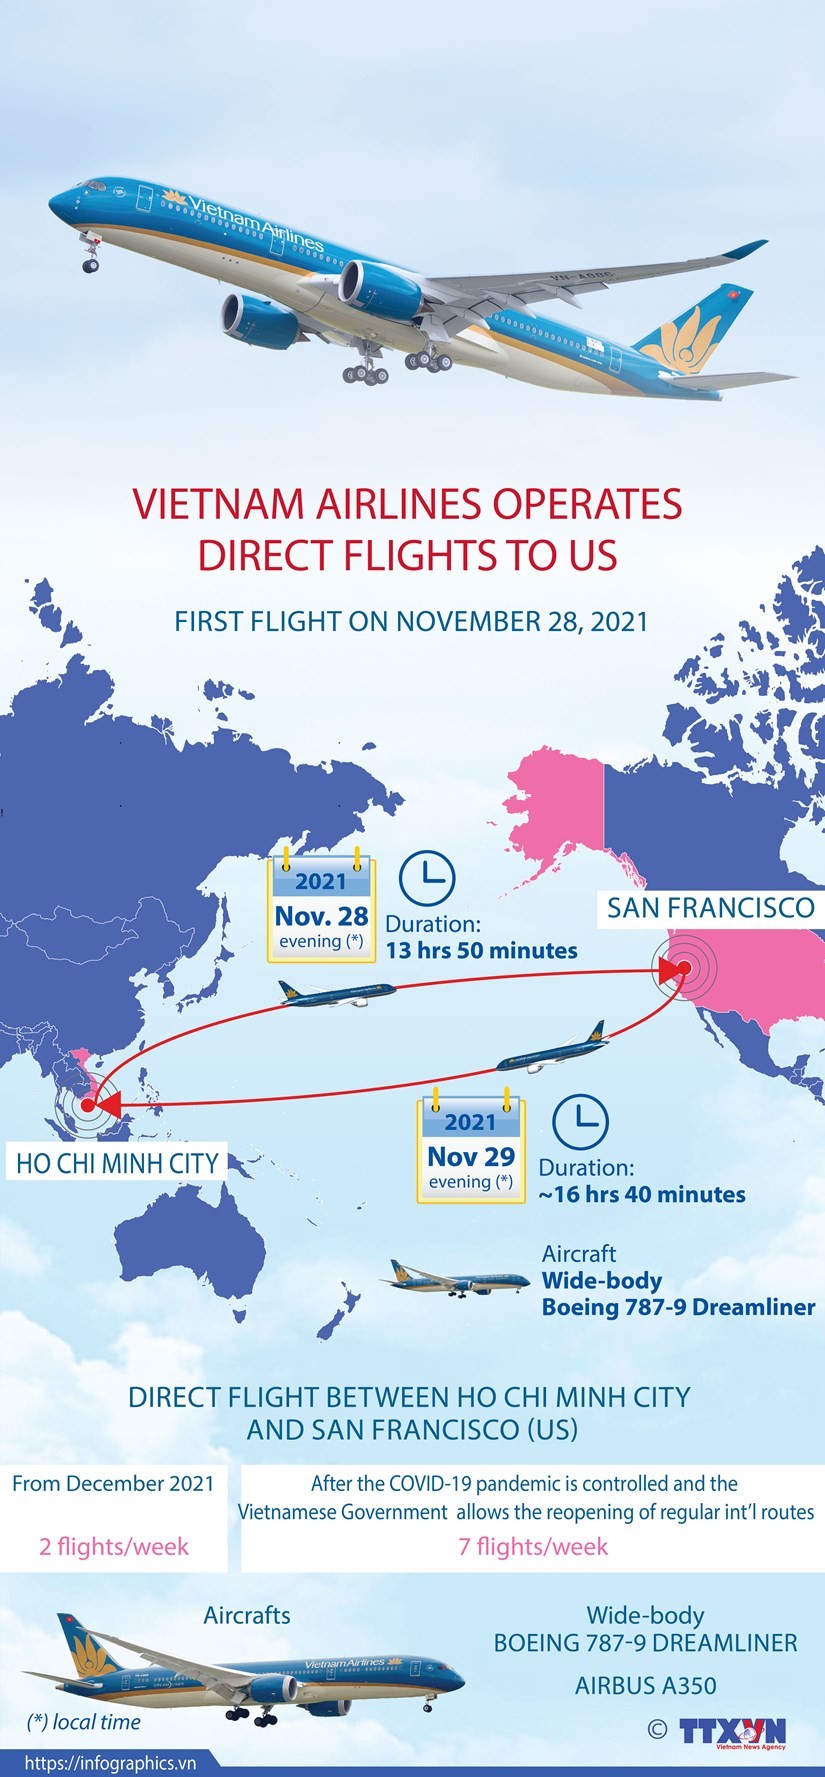 Viet Nam Airlines operates direct flights to US